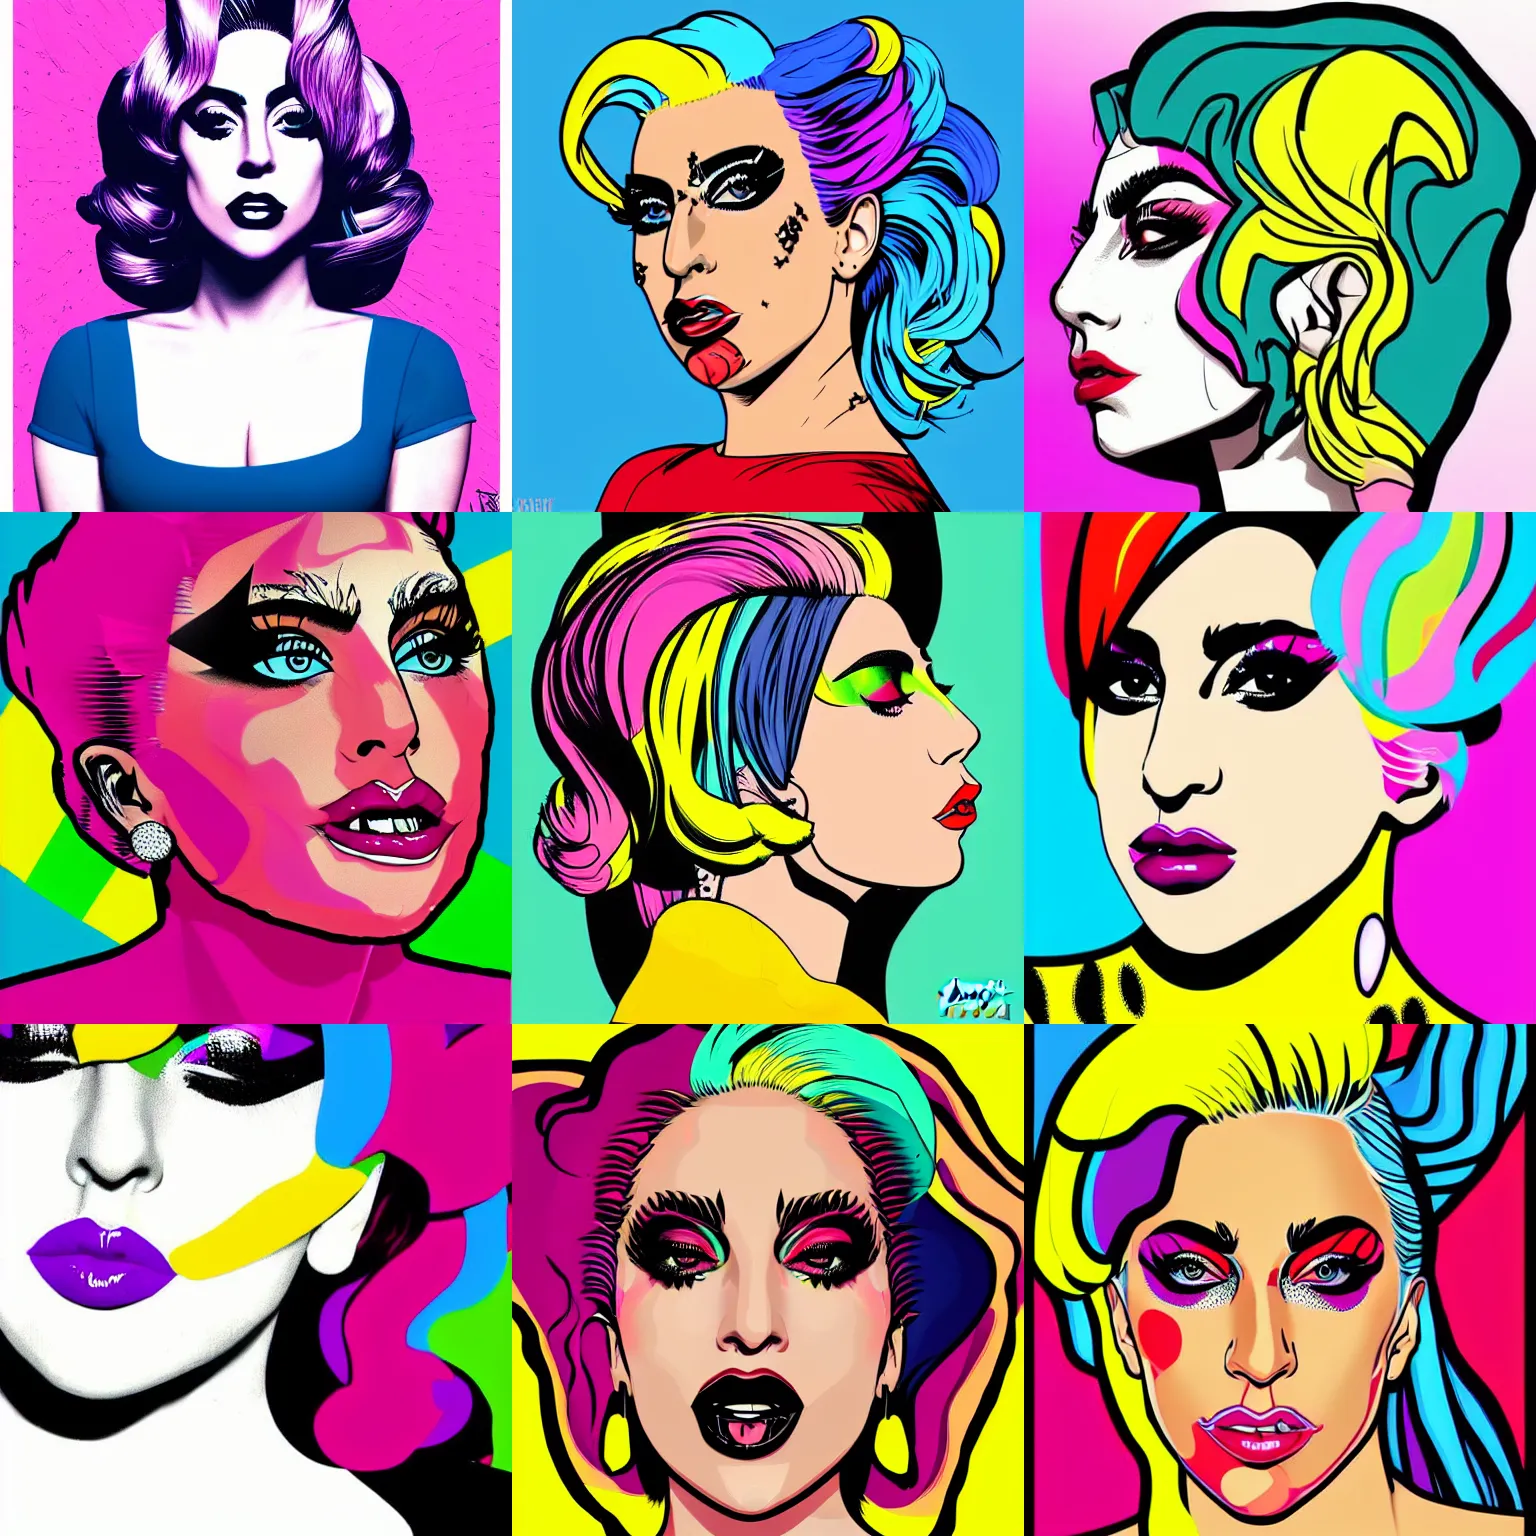 Prompt: portrait pop art comic illustration of Lady Gaga, profile view, bright colors, high detail, angry, sullen